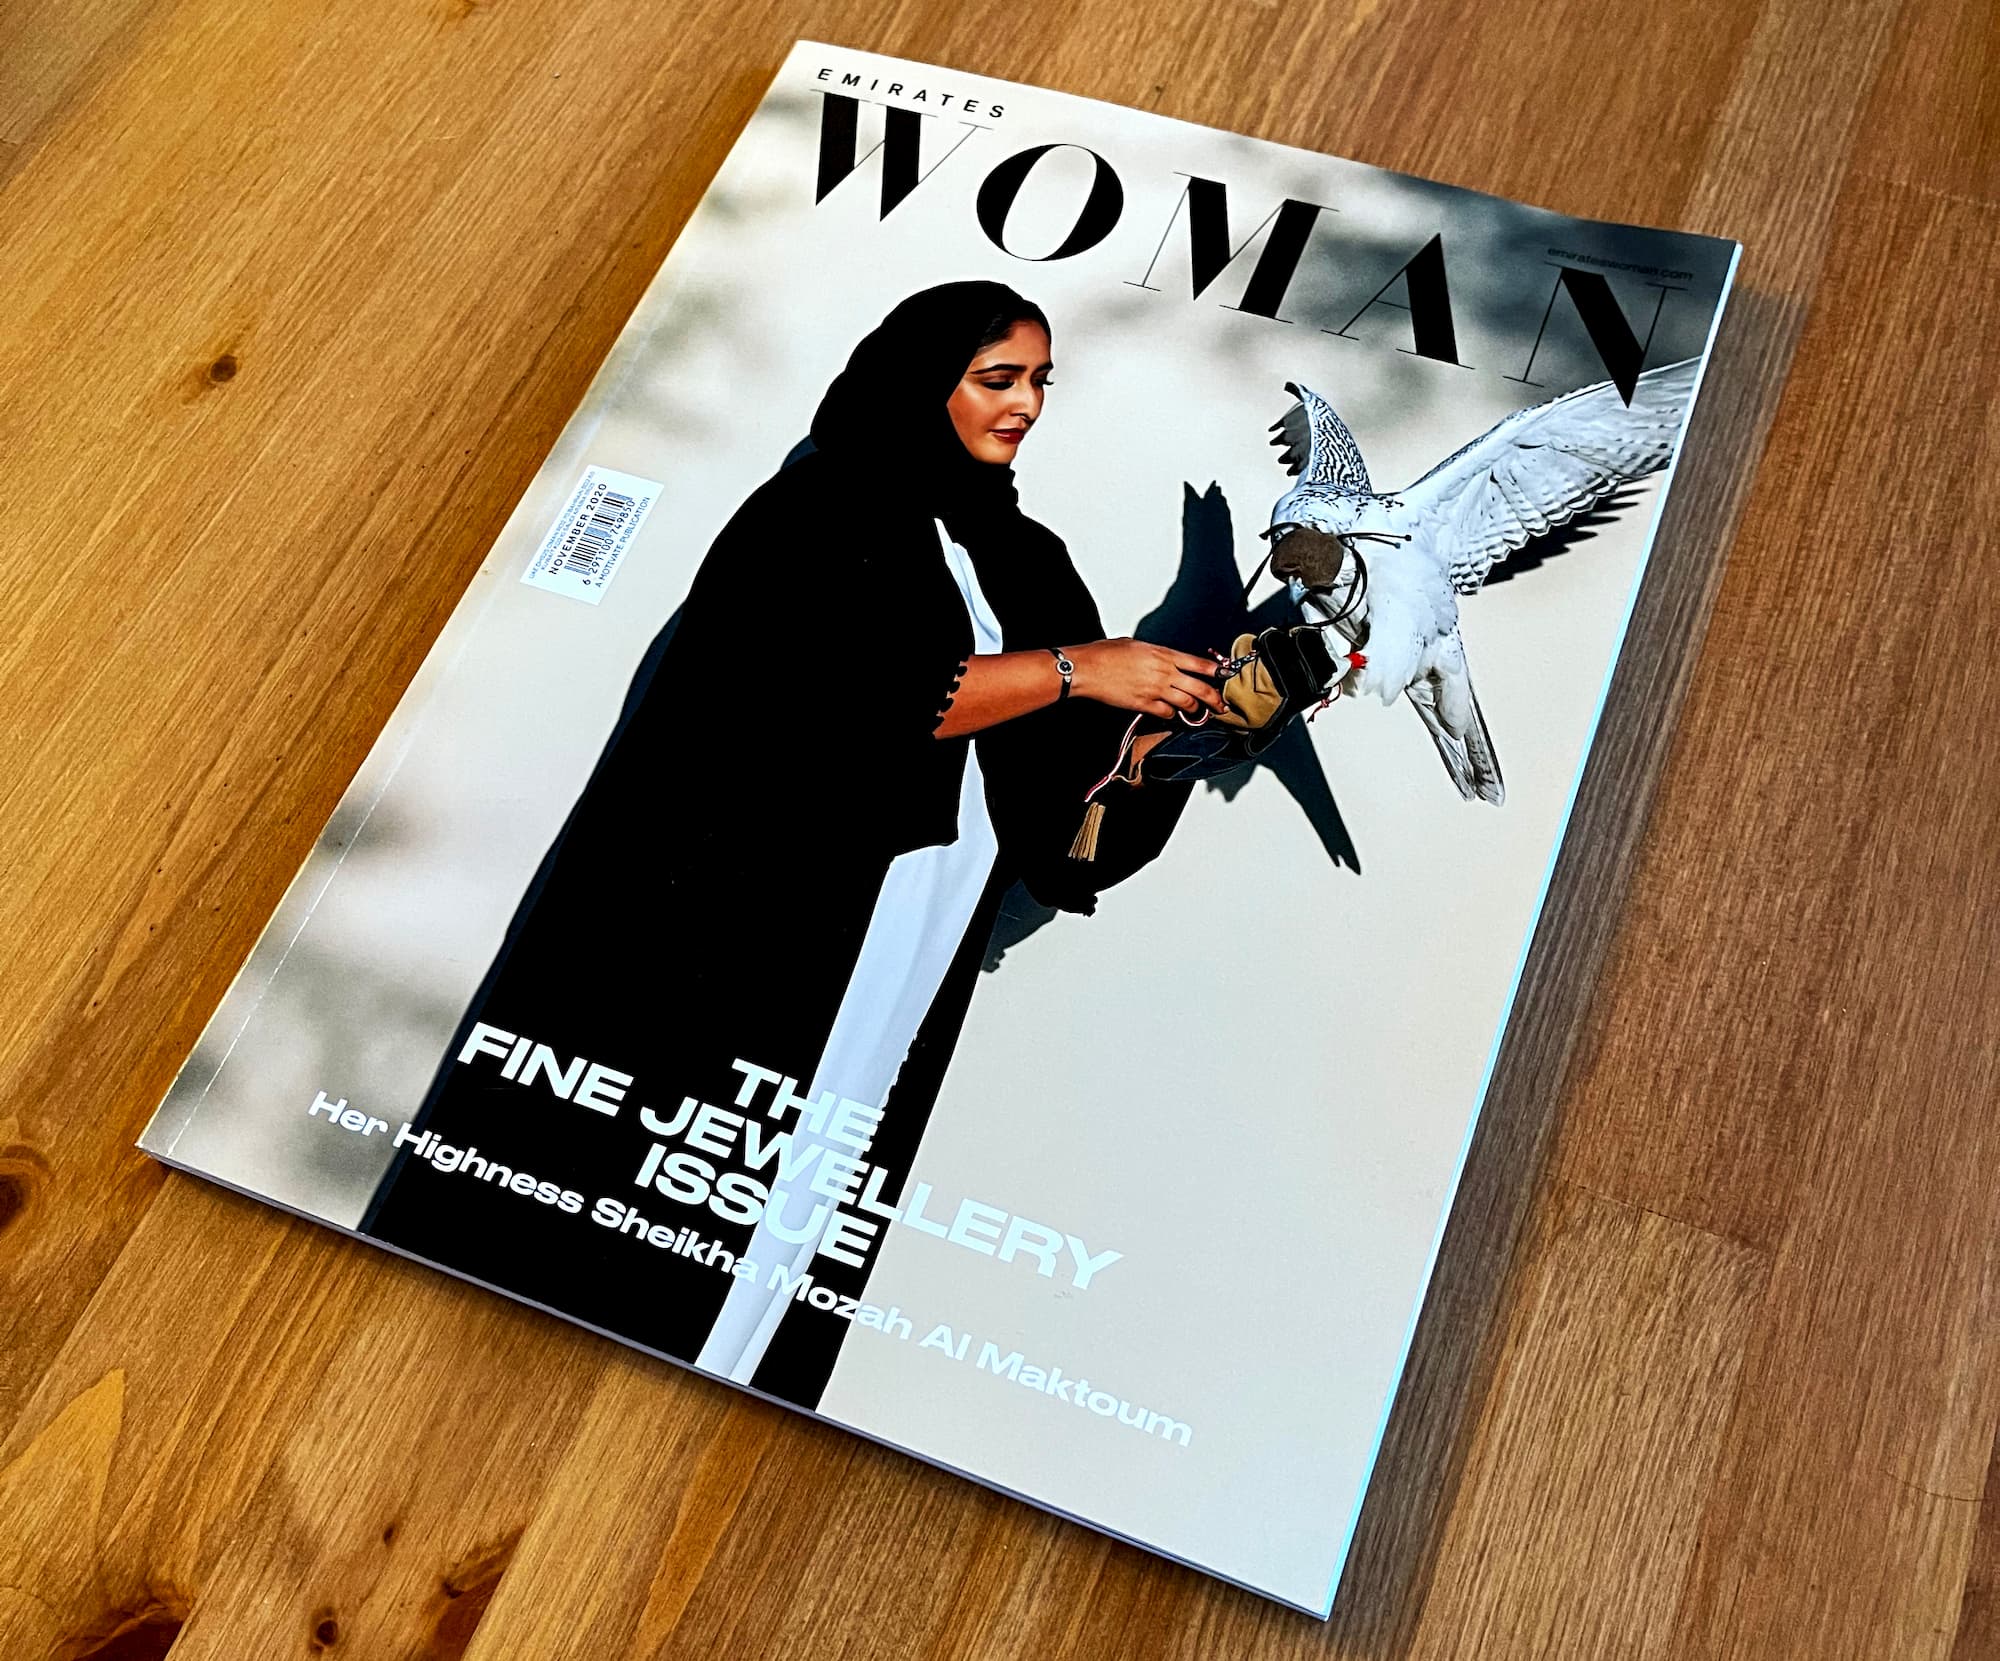 Porsche WebAR print ads as featured in Emirates Woman, Vogue Arabia, GQ Middle East and Forbes